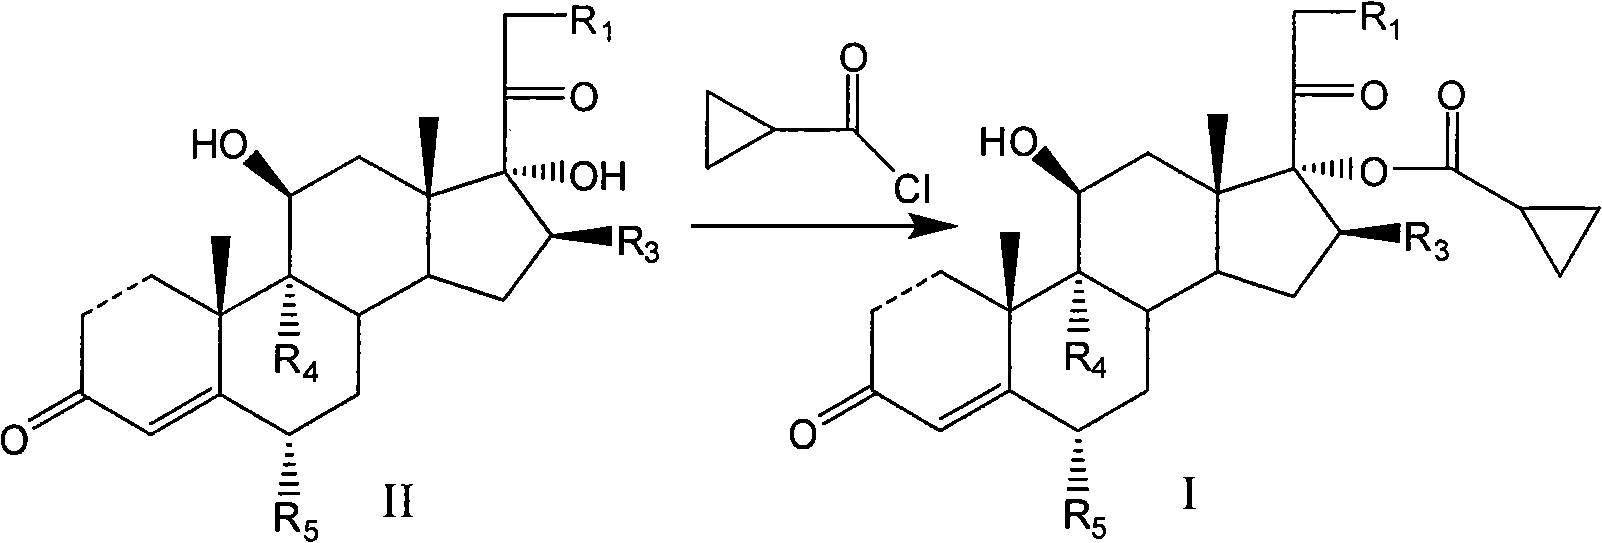 Cyclopropyl pregnene compound and application thereof